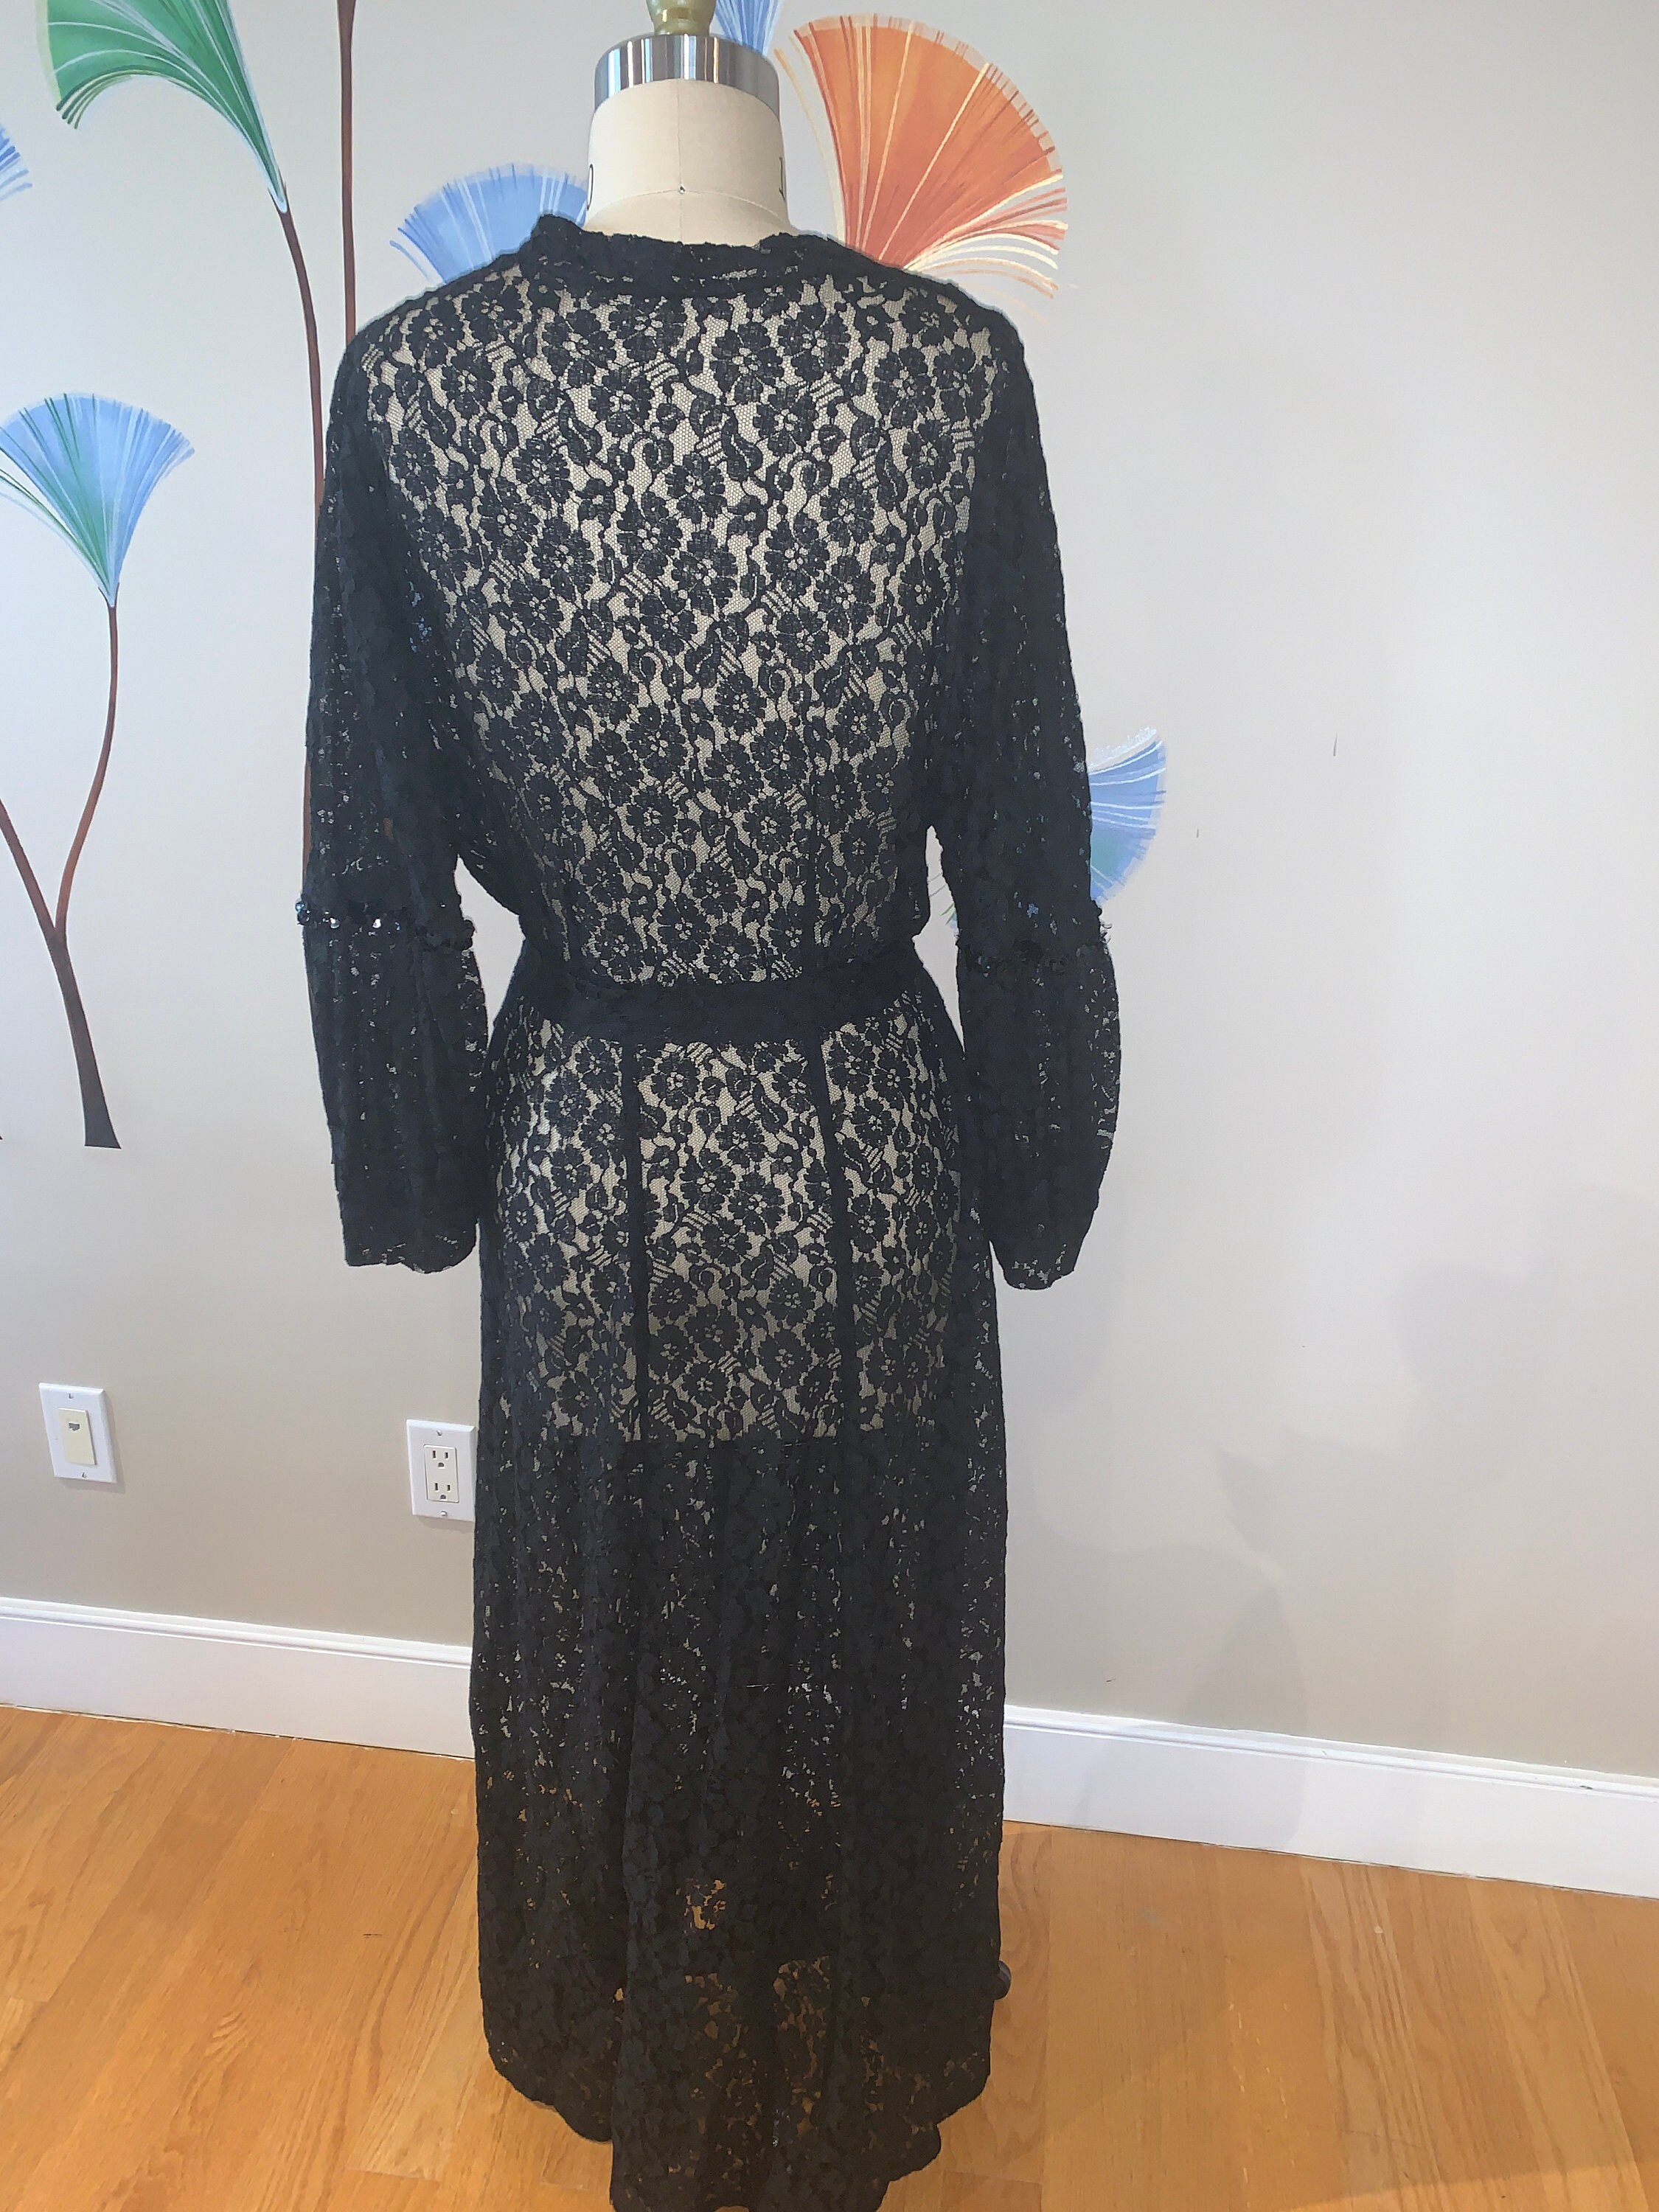 True Vintage 1930's Black Lace Gown with Belt | Etsy